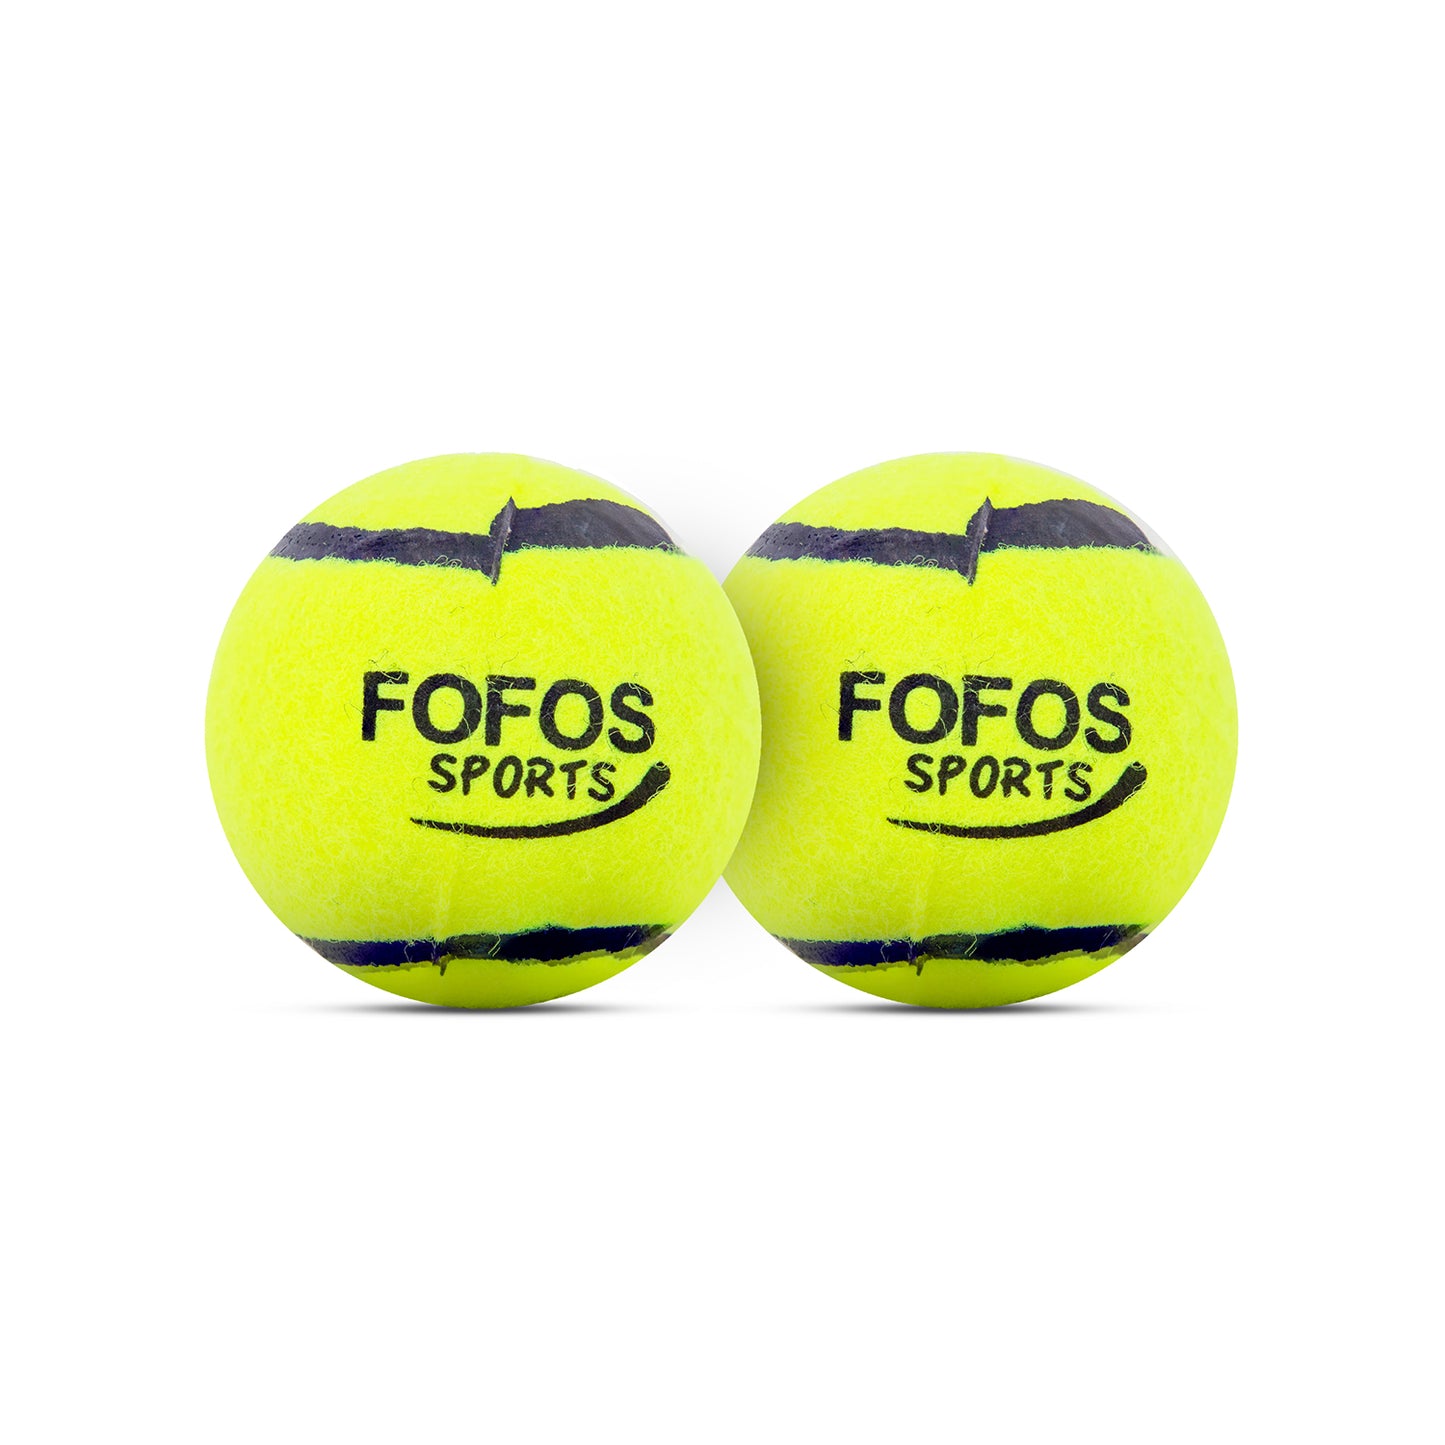 Fofos - Sports Fetch Ball Durable Toy For Dogs